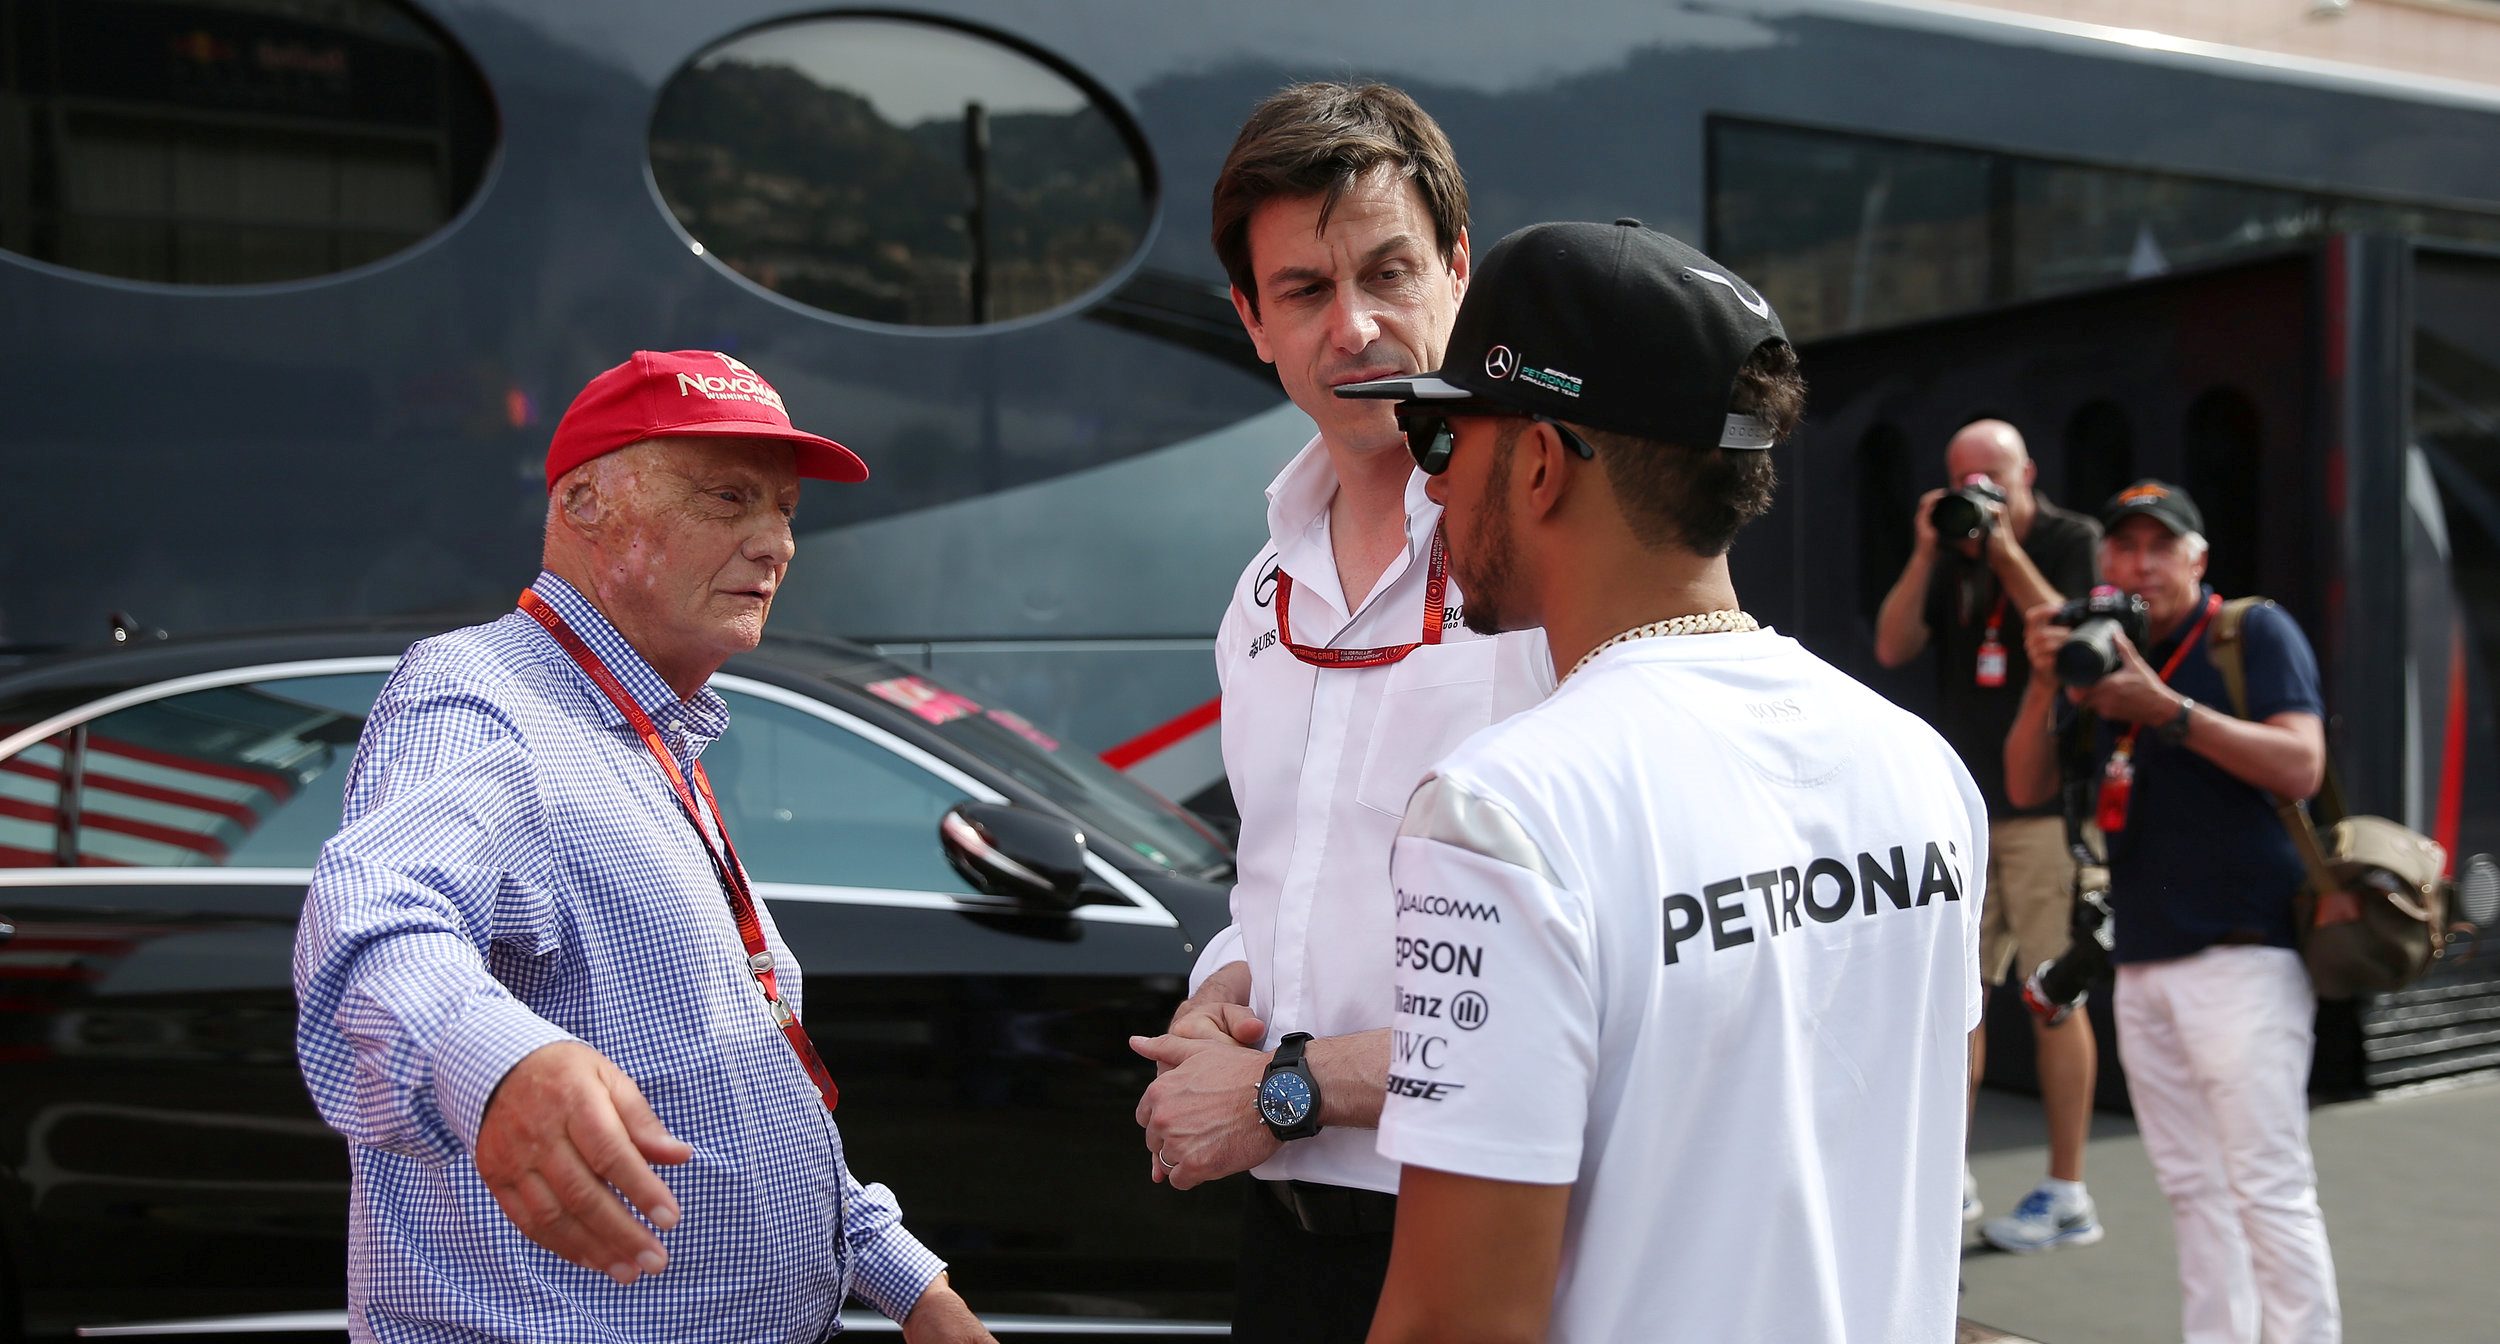 Toto Wolff plays down ‘just drive it’ remark to Lewis Hamilton